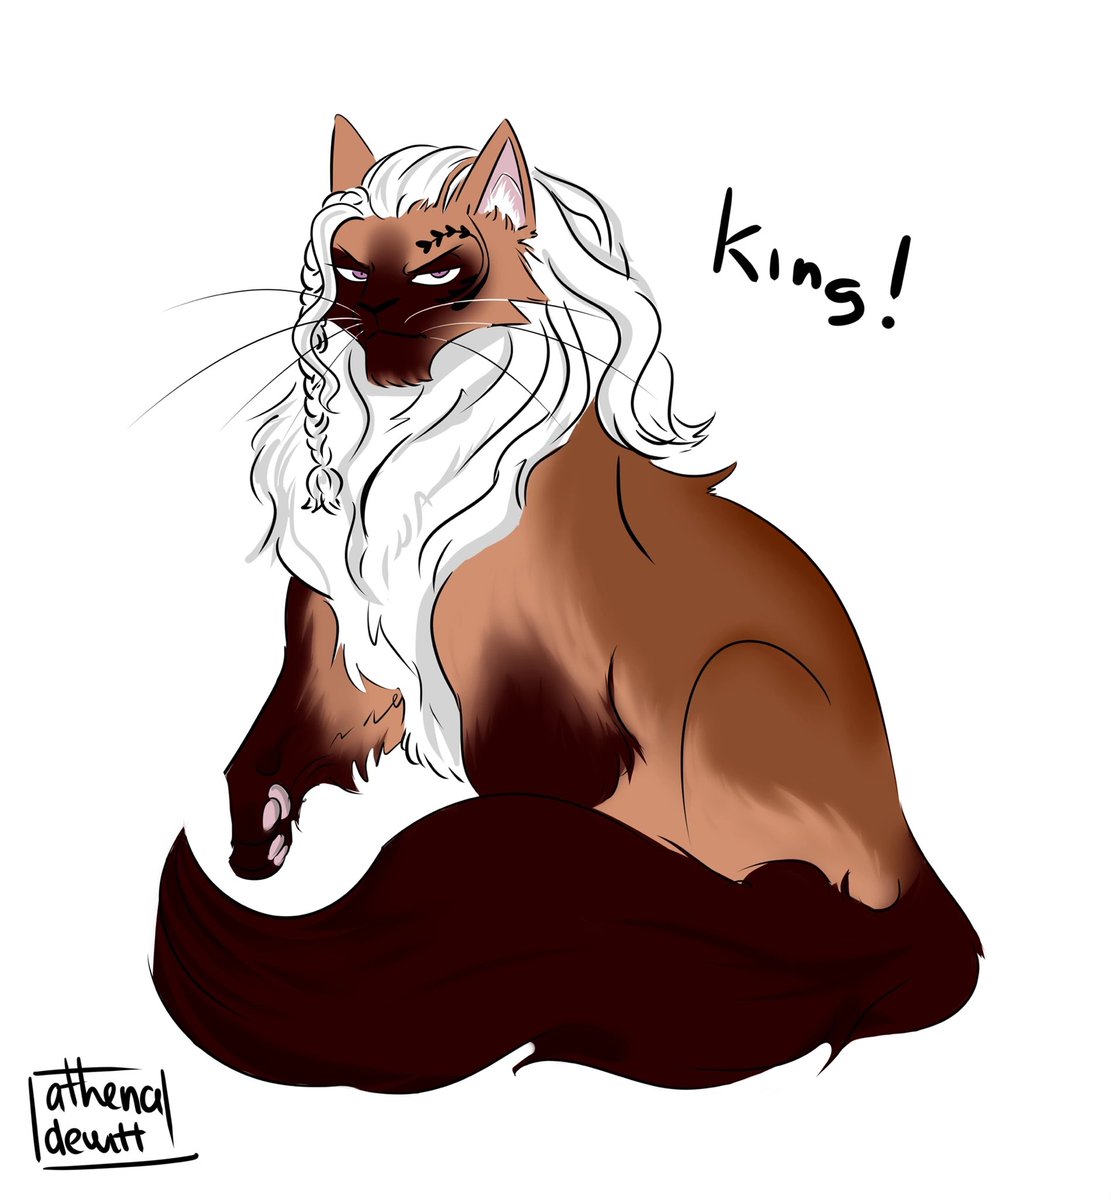 #ONEPIECE 🐱AU
King the Siamese Cat!